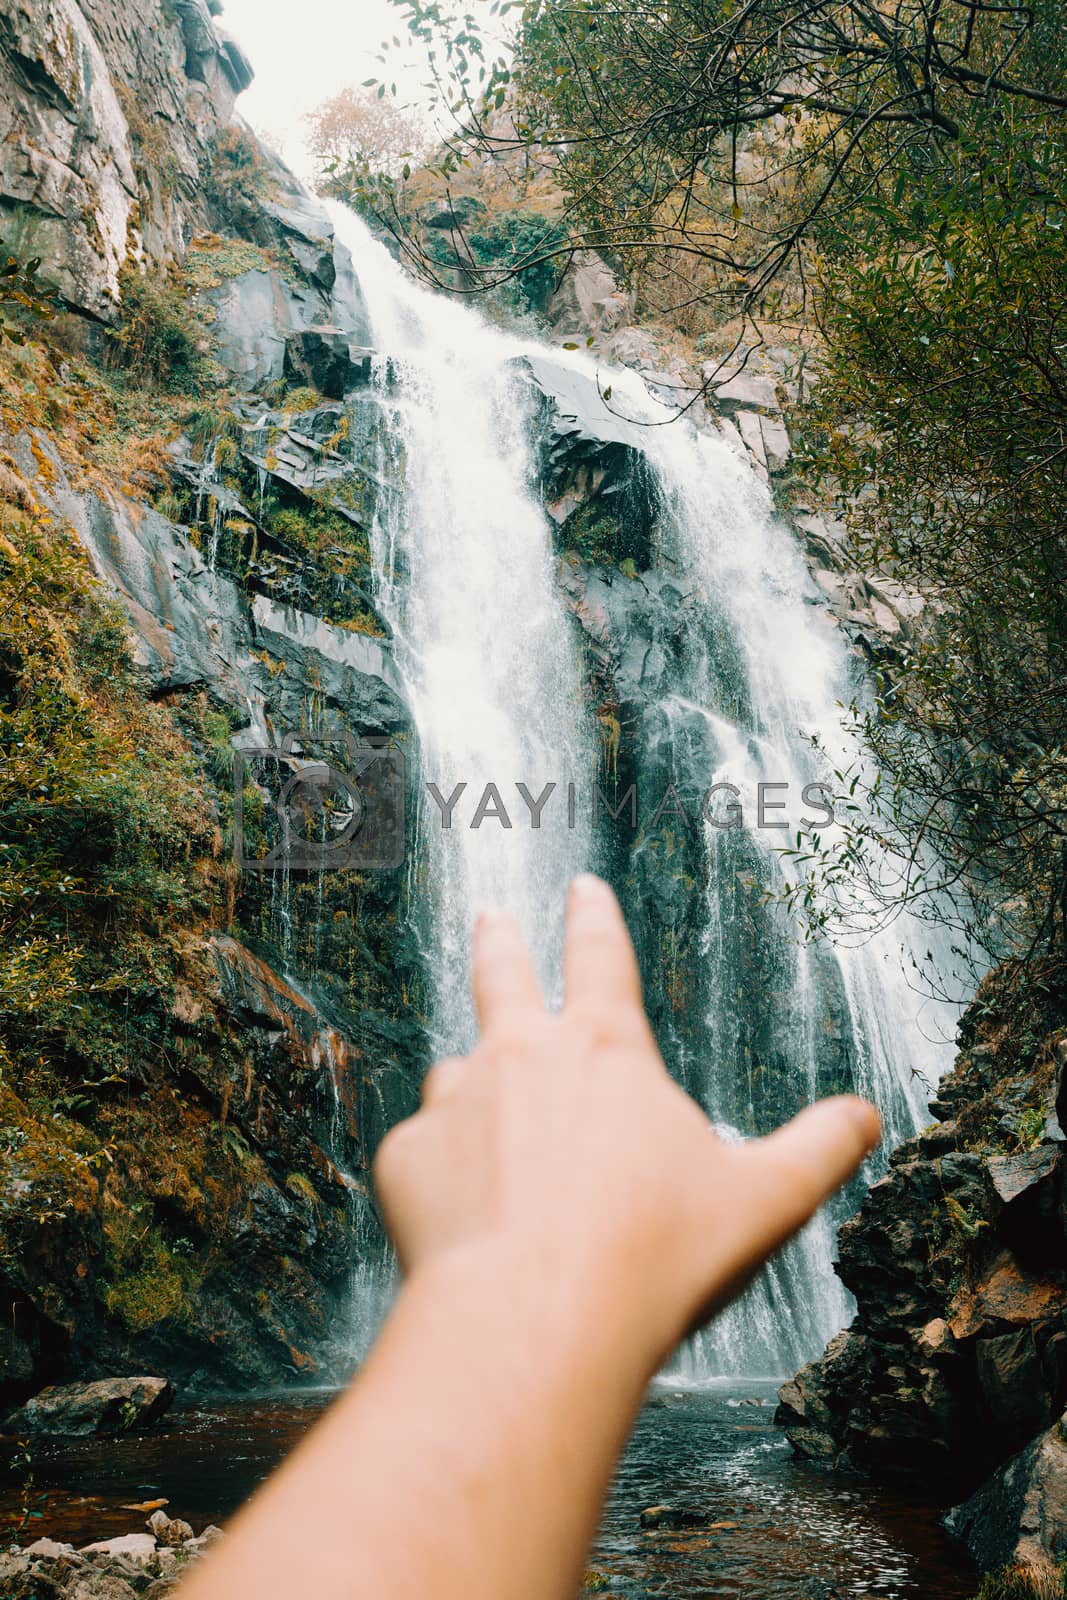 Royalty free image of Out of focus hand reaching to a majestic waterfall by AveCalvar